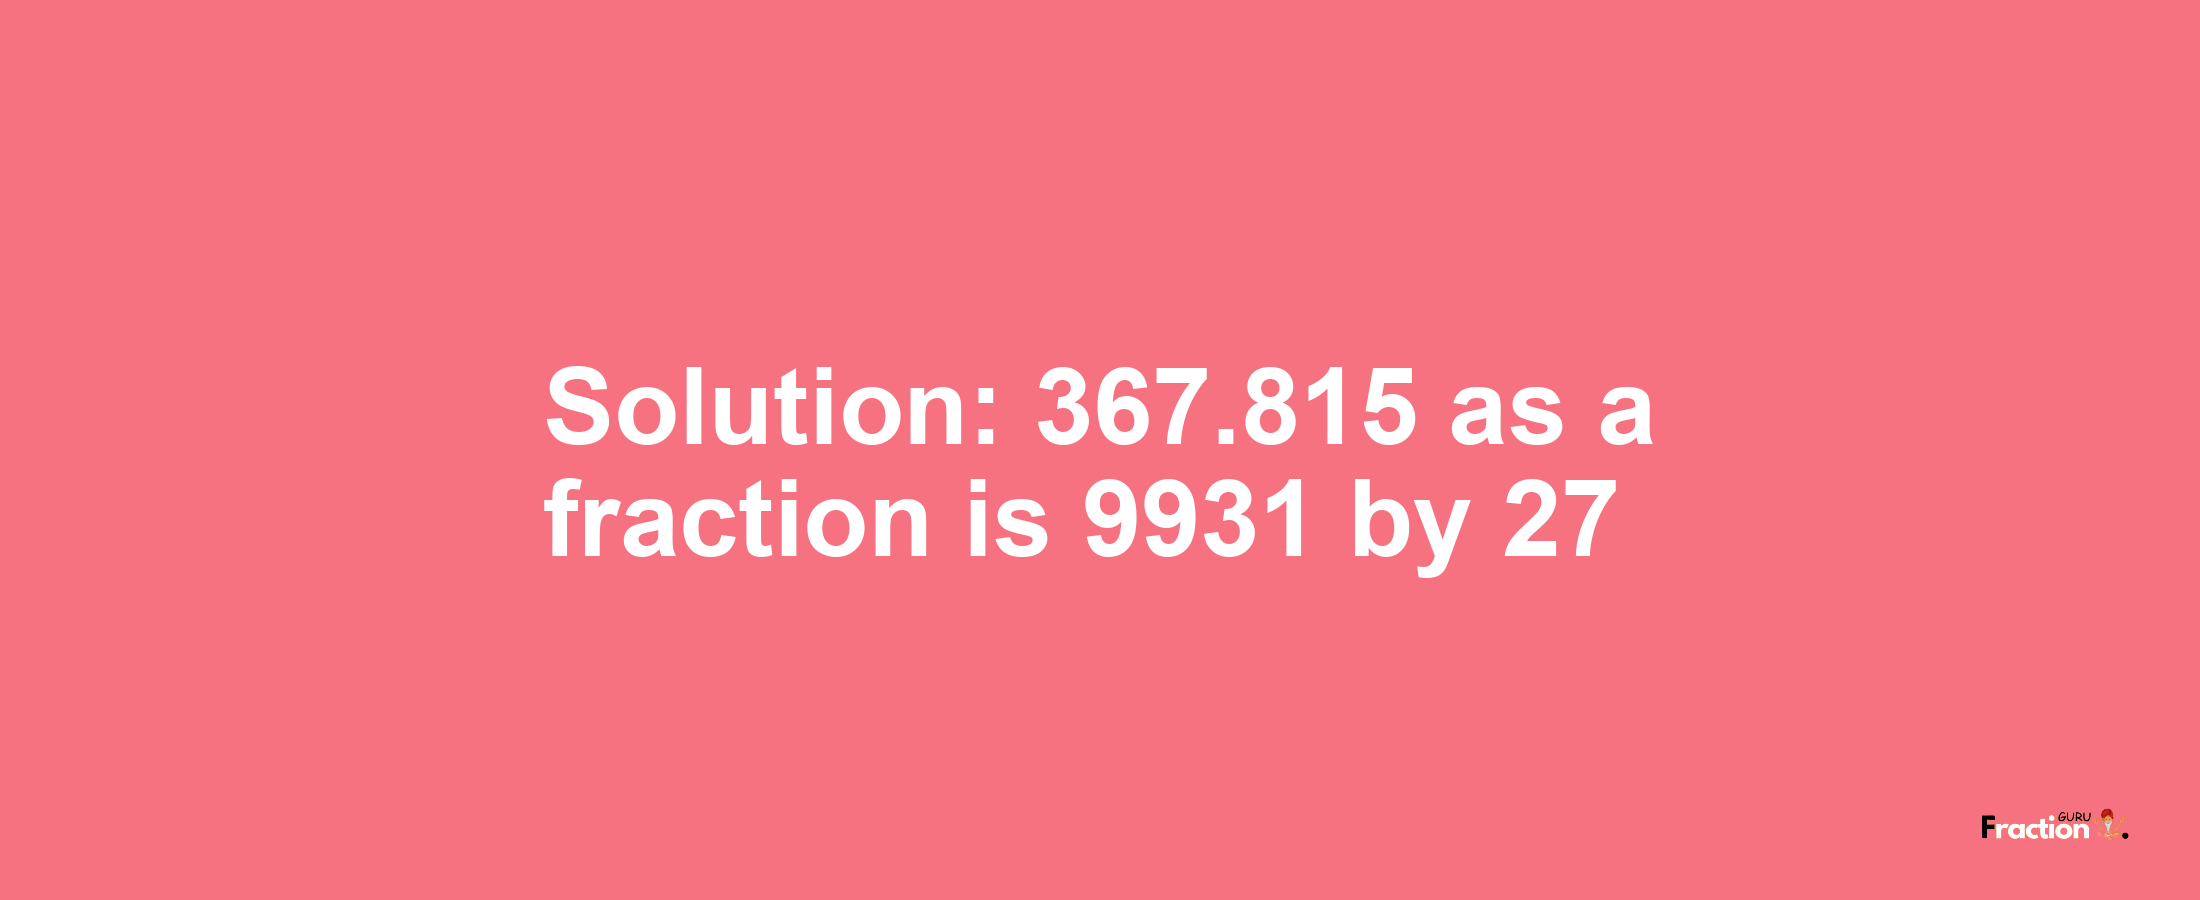 Solution:367.815 as a fraction is 9931/27